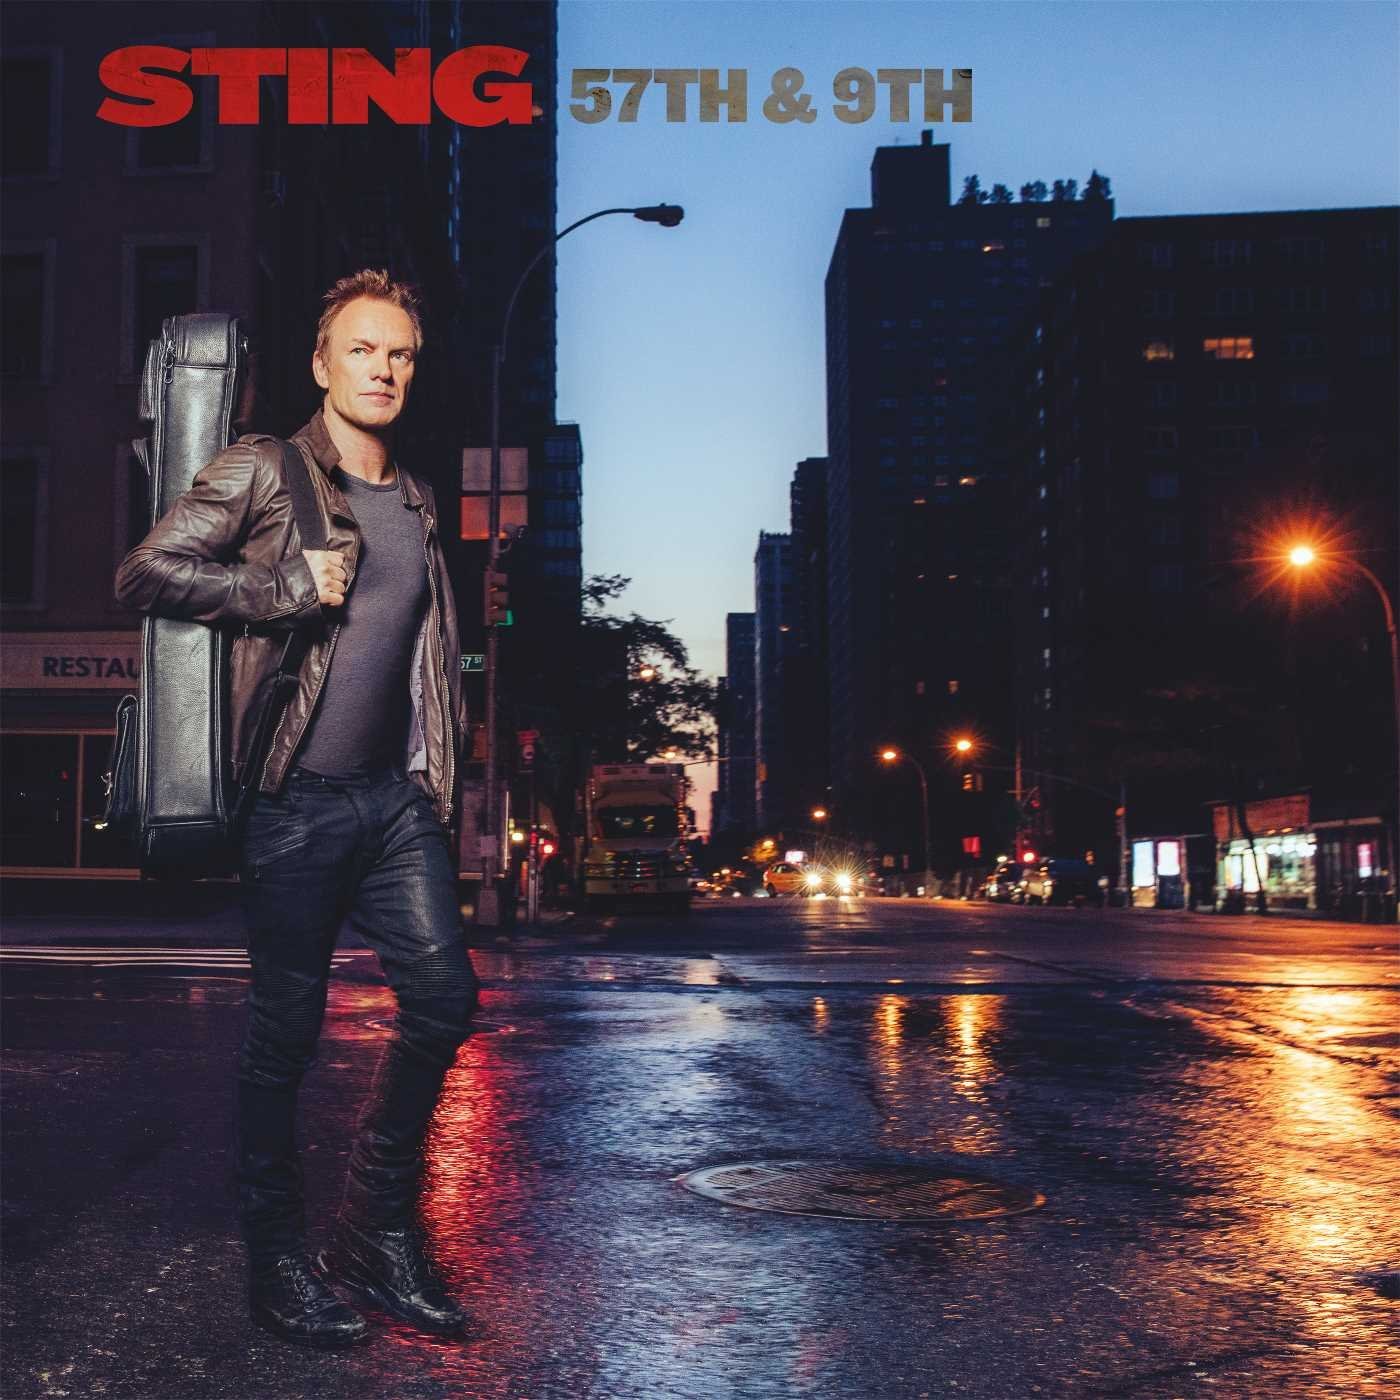 Sting - 57th & 9th {Deluxe Edition} (2016) [HDTracks FLAC 24bit/96kHz]